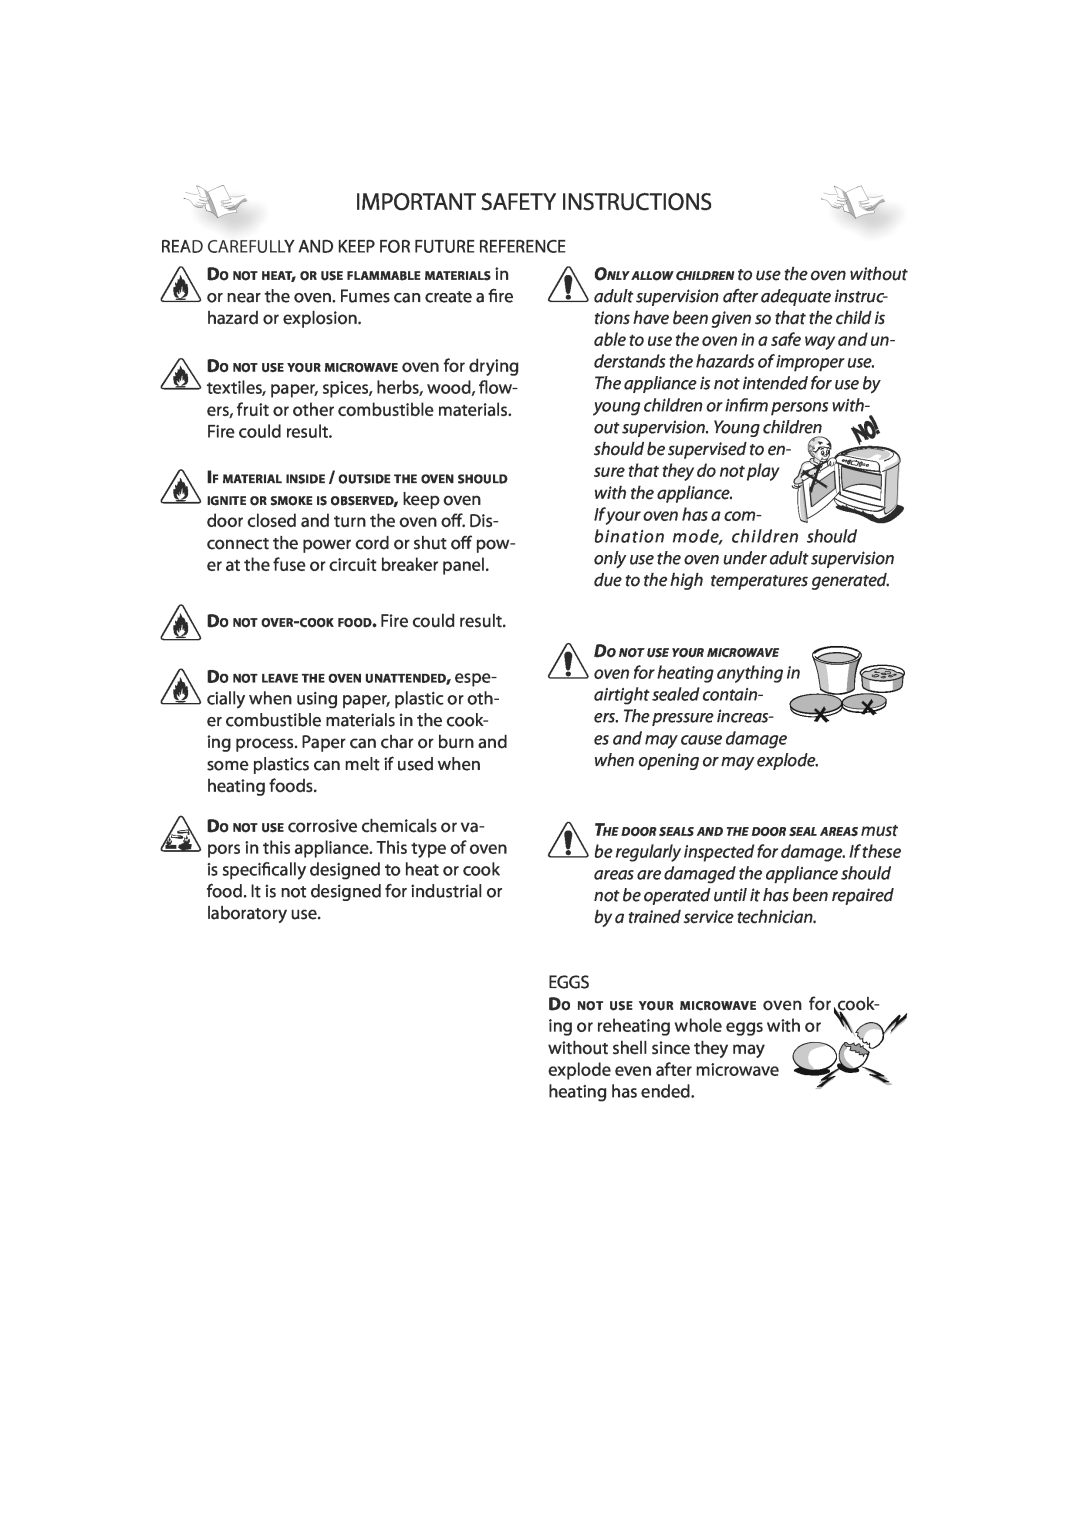 CDA MC50, MC60 manual Important Safety Instructions, If your oven has a com, when opening or may explode 